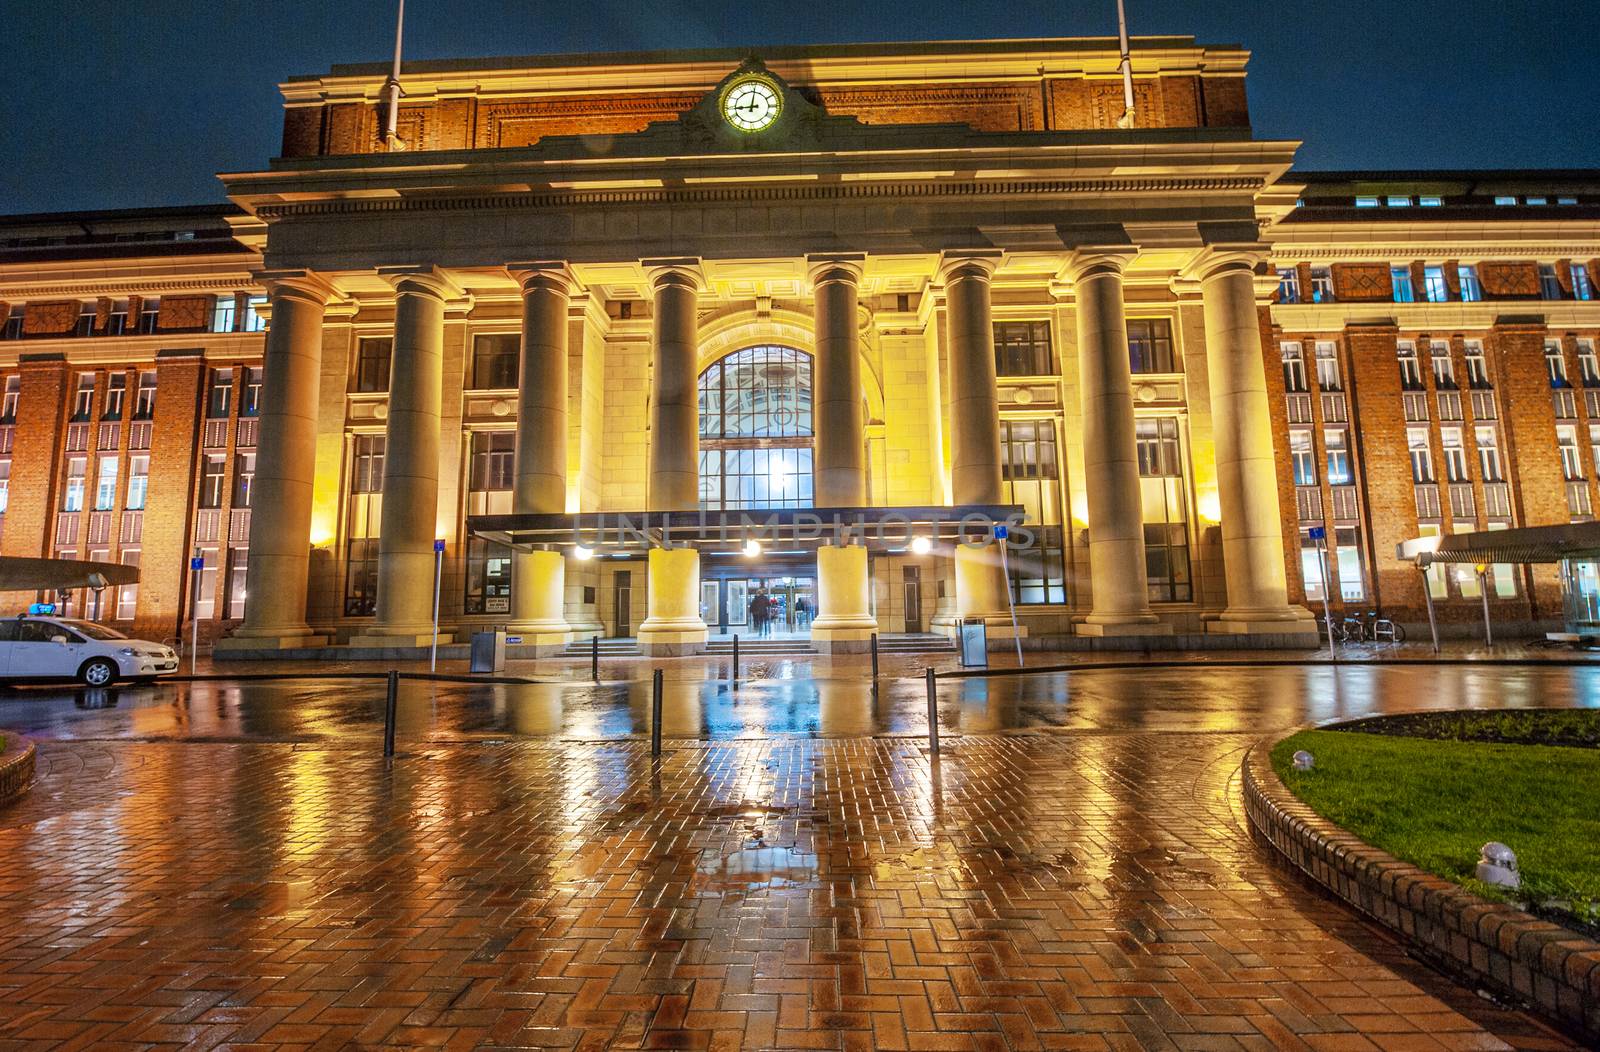 Evening photo of Railway station in Wellington, capital of New Zealand. The station was built in 1937